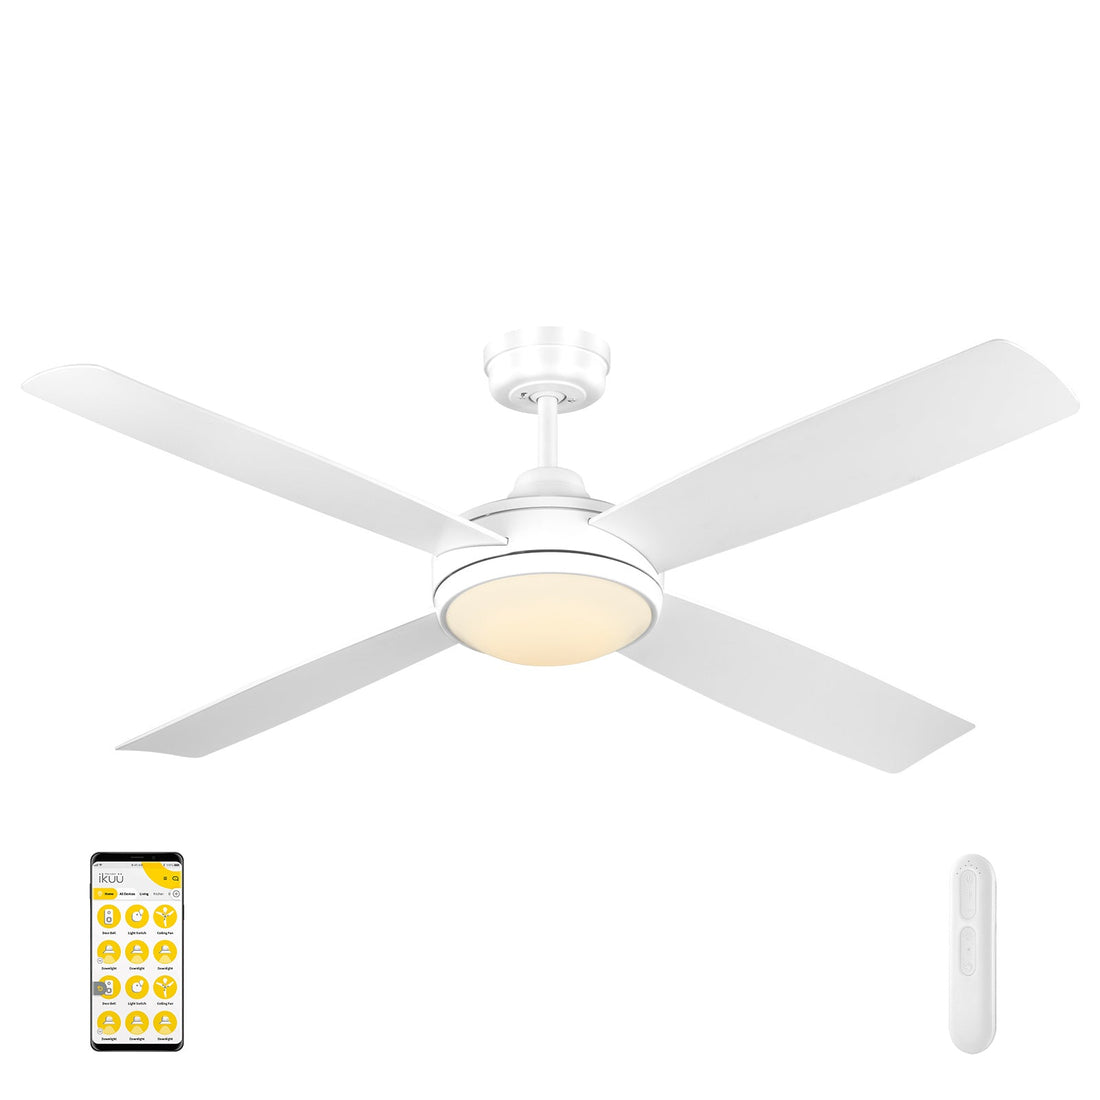 Anova DC Ikuü Smart Wi-Fi Ceiling Fan with LED Light and Remote Mercator